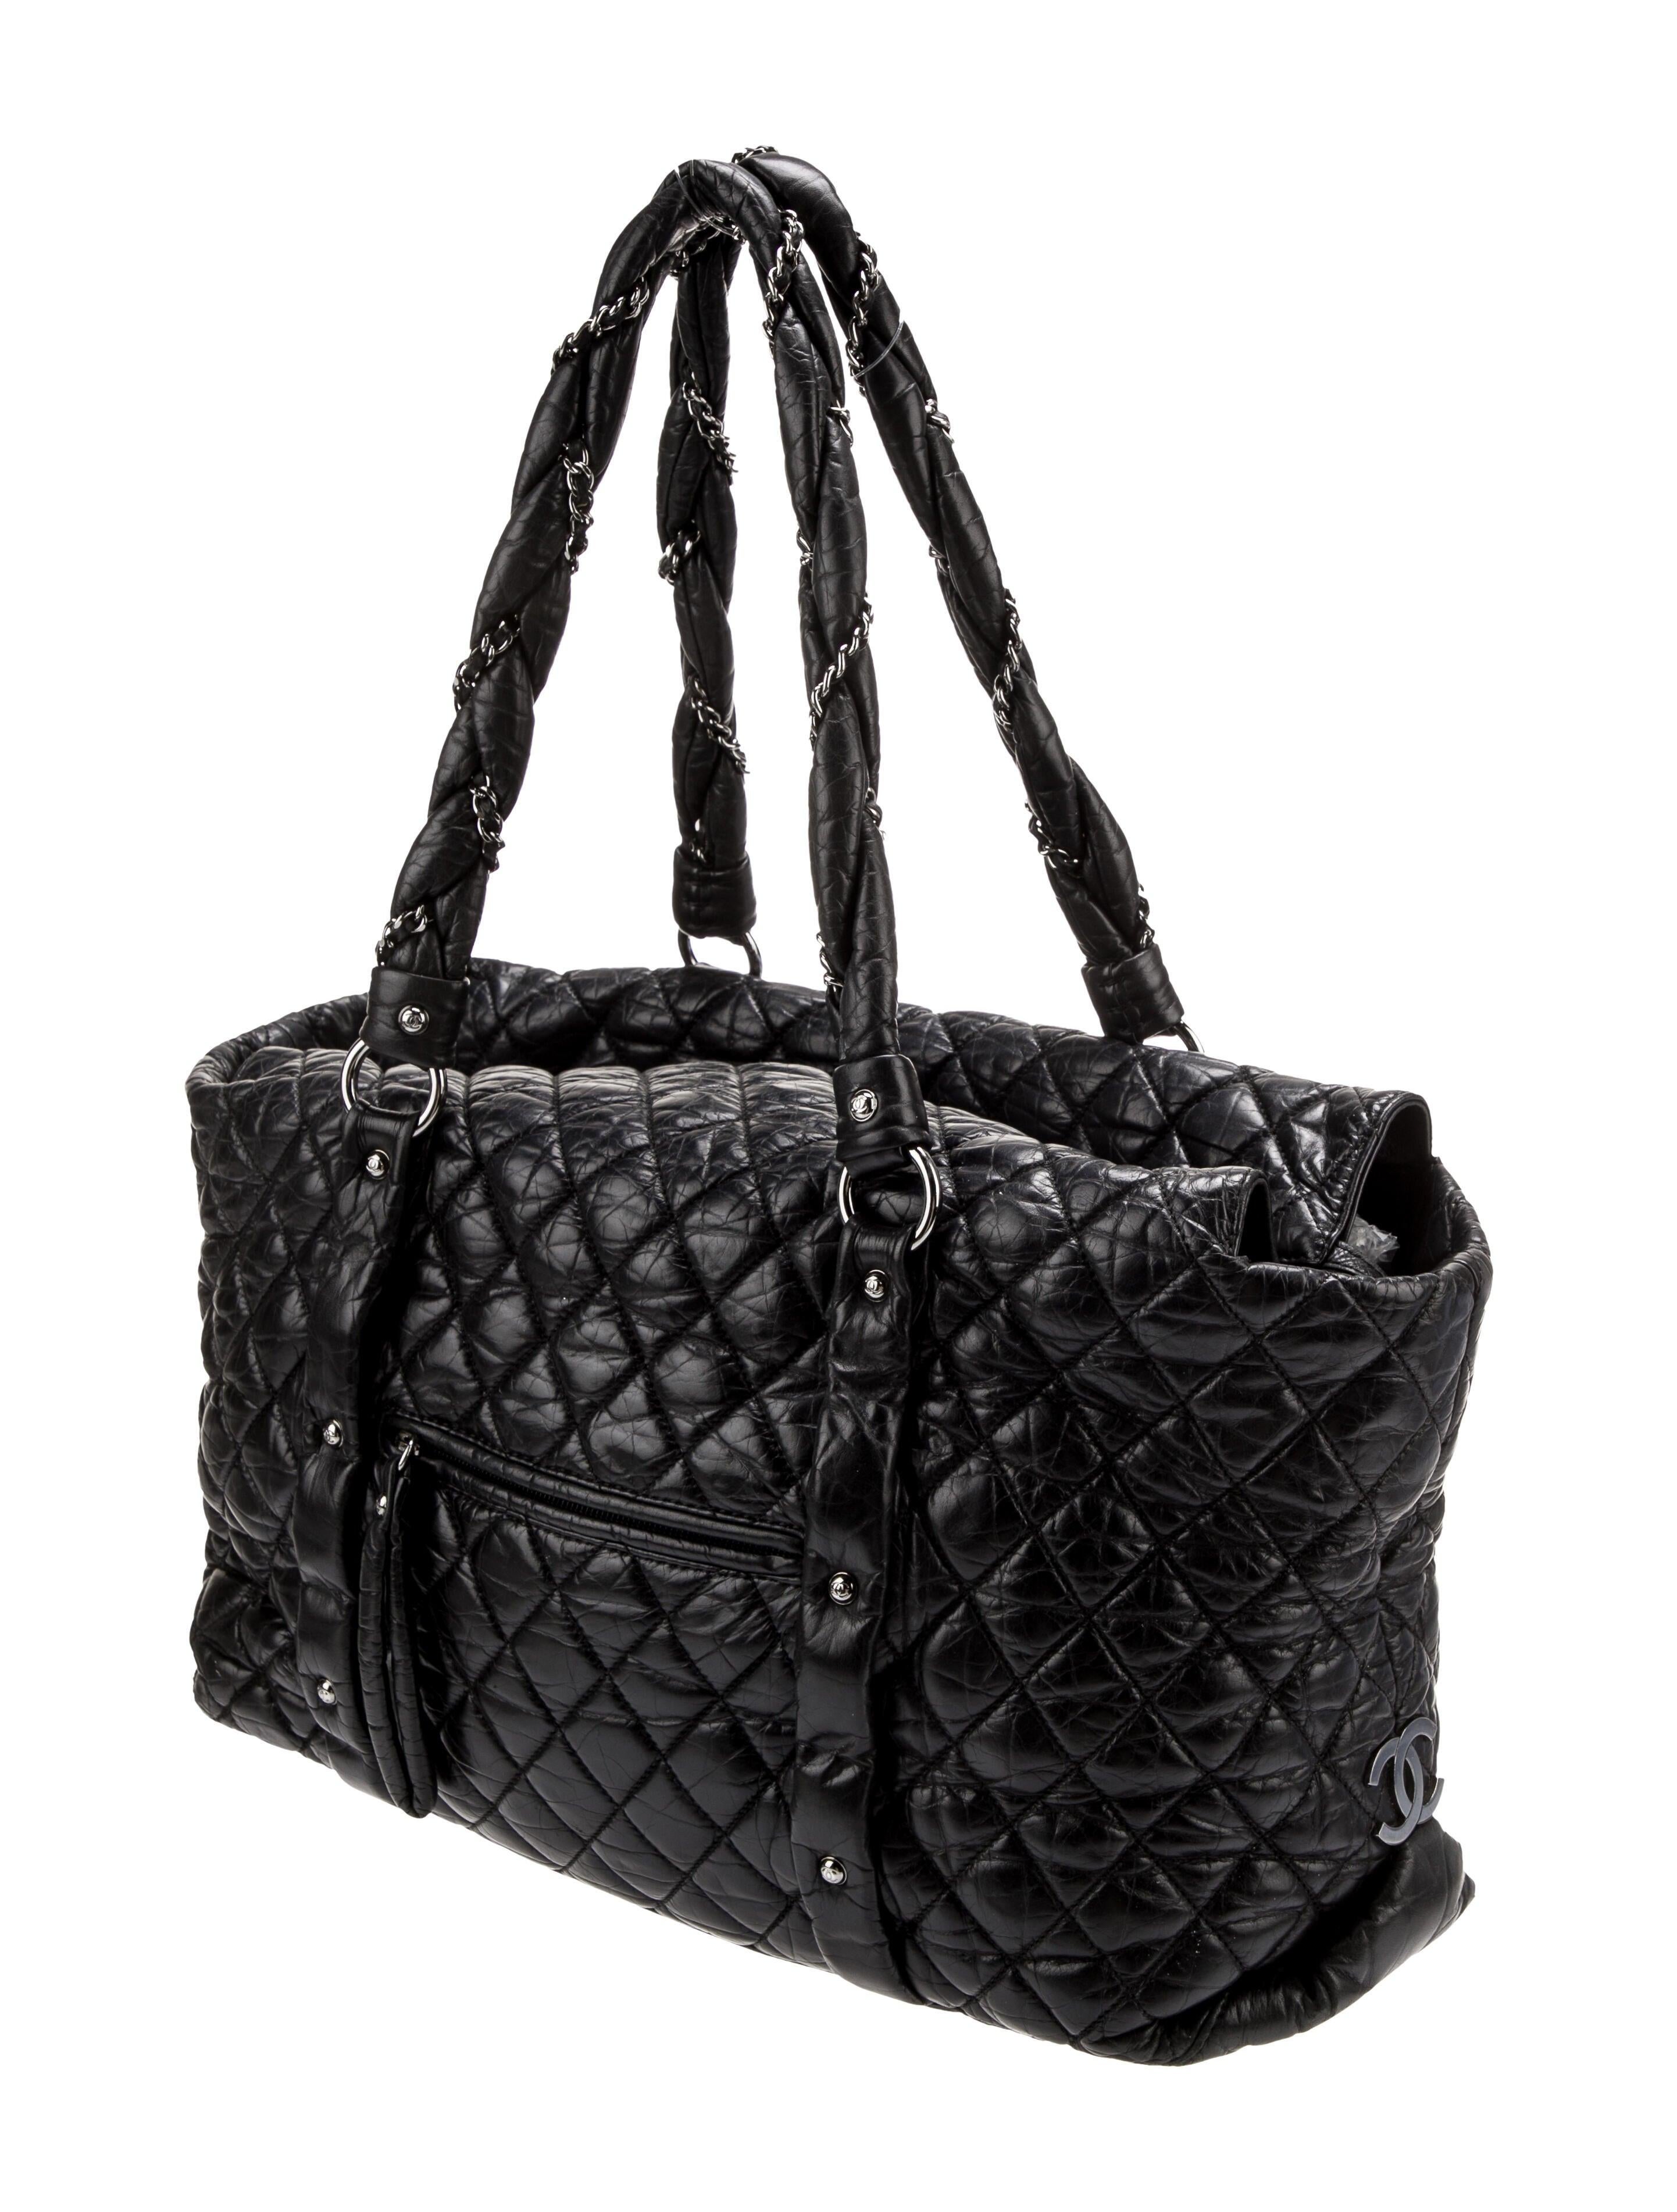 Chanel 2006 Soft Plush Quilted Distressed Leather Large Carry-On Travel Tote Bag For Sale 6